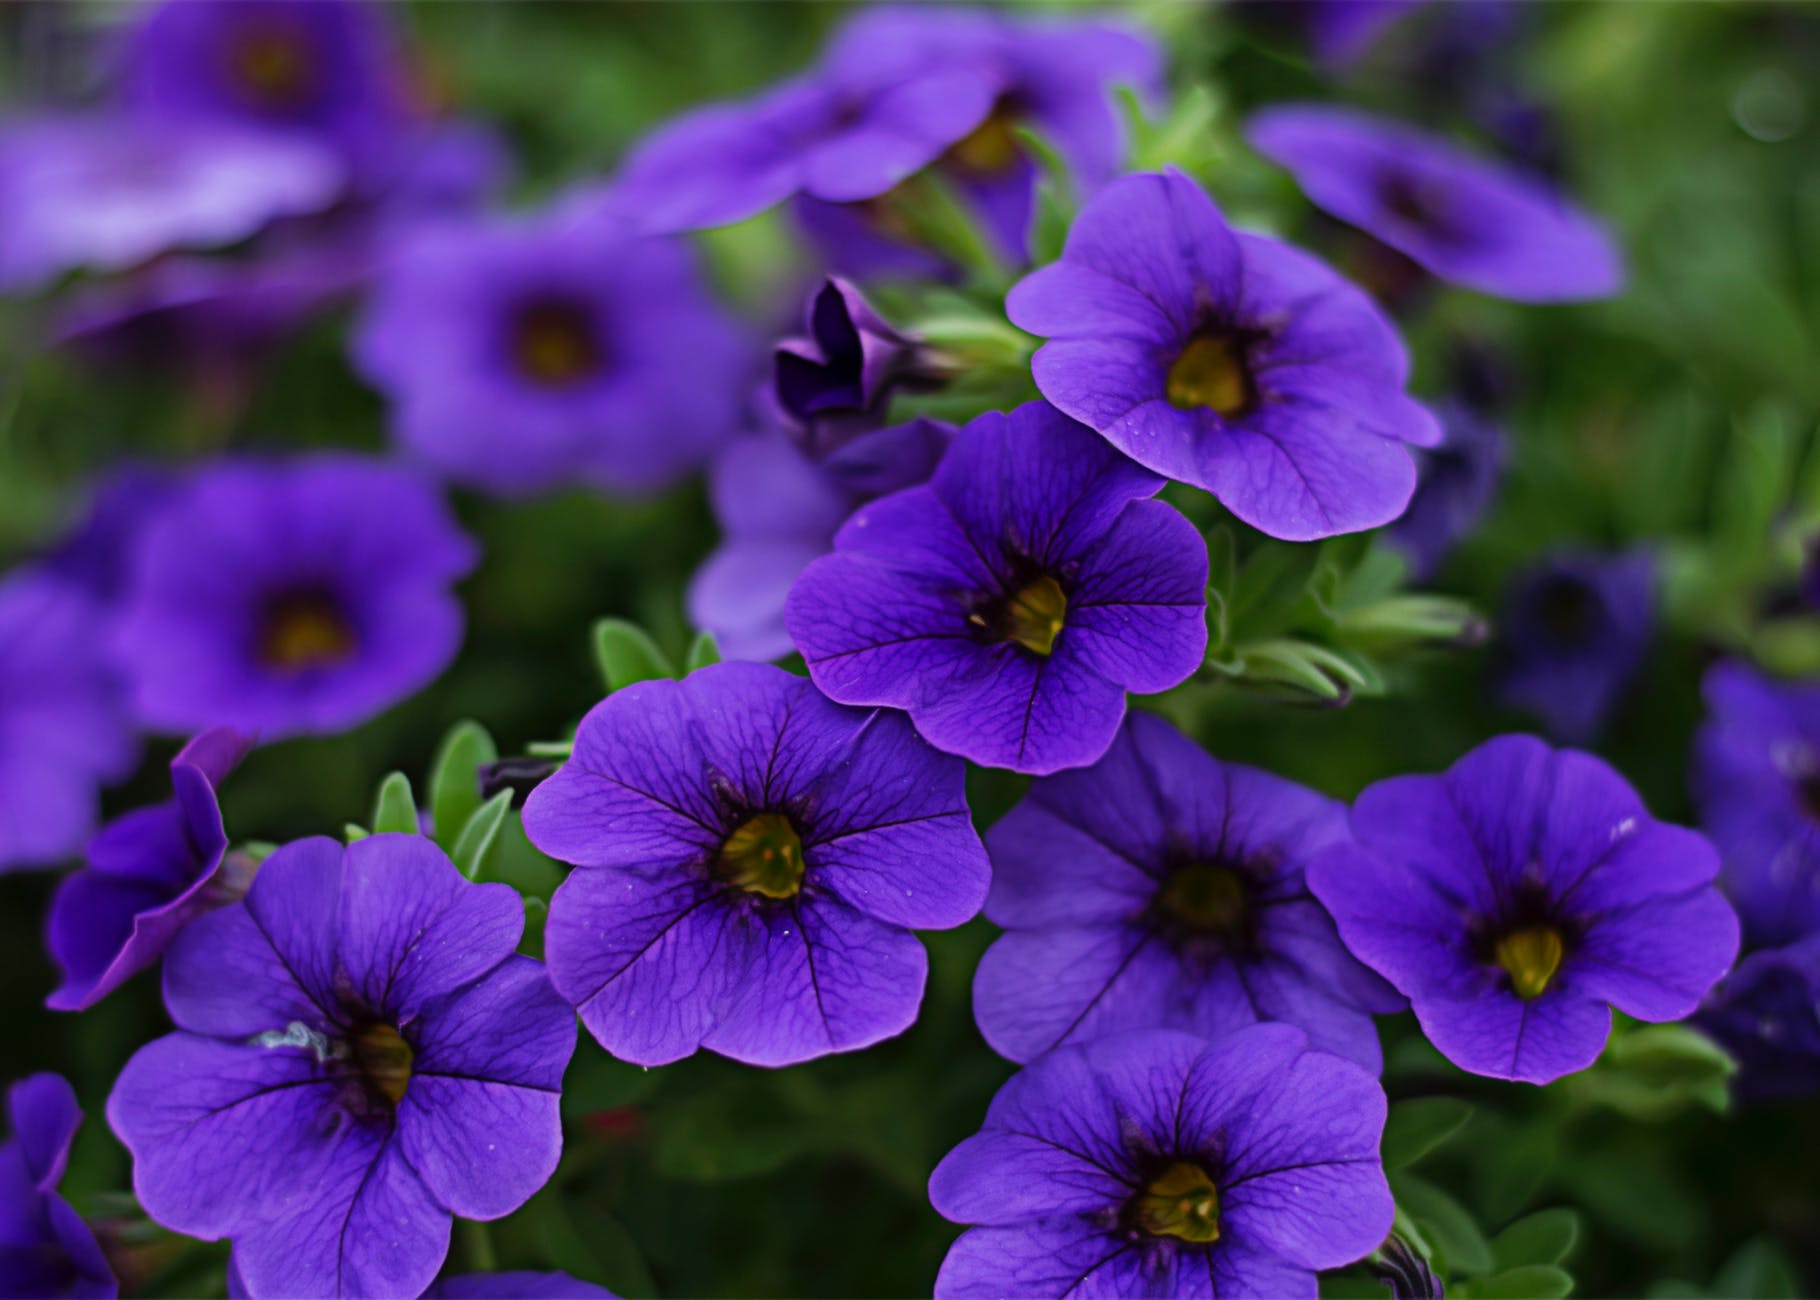 close up photography of purple petunia flowers